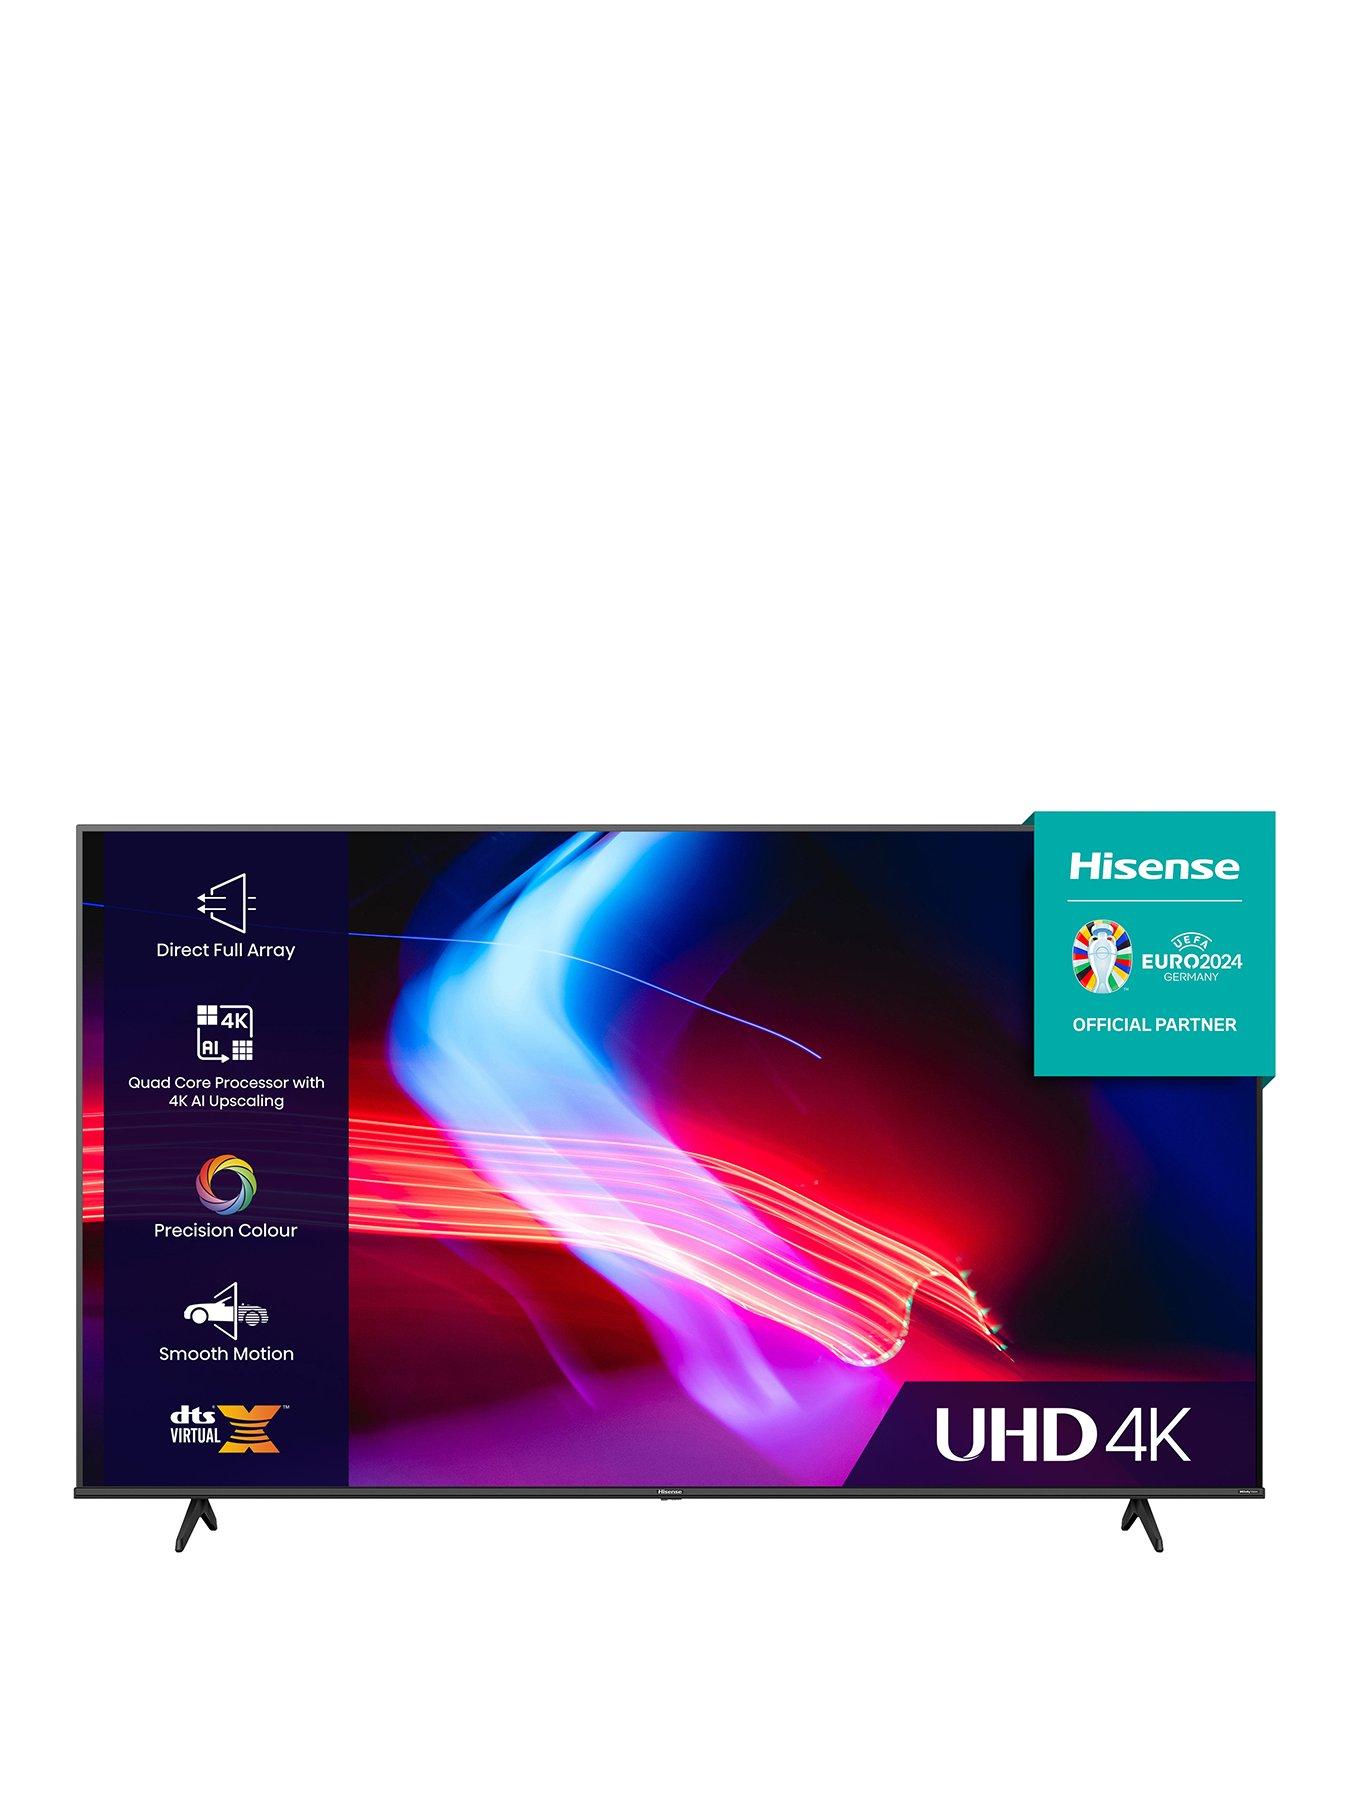 Televisions, Electricals, Hisense